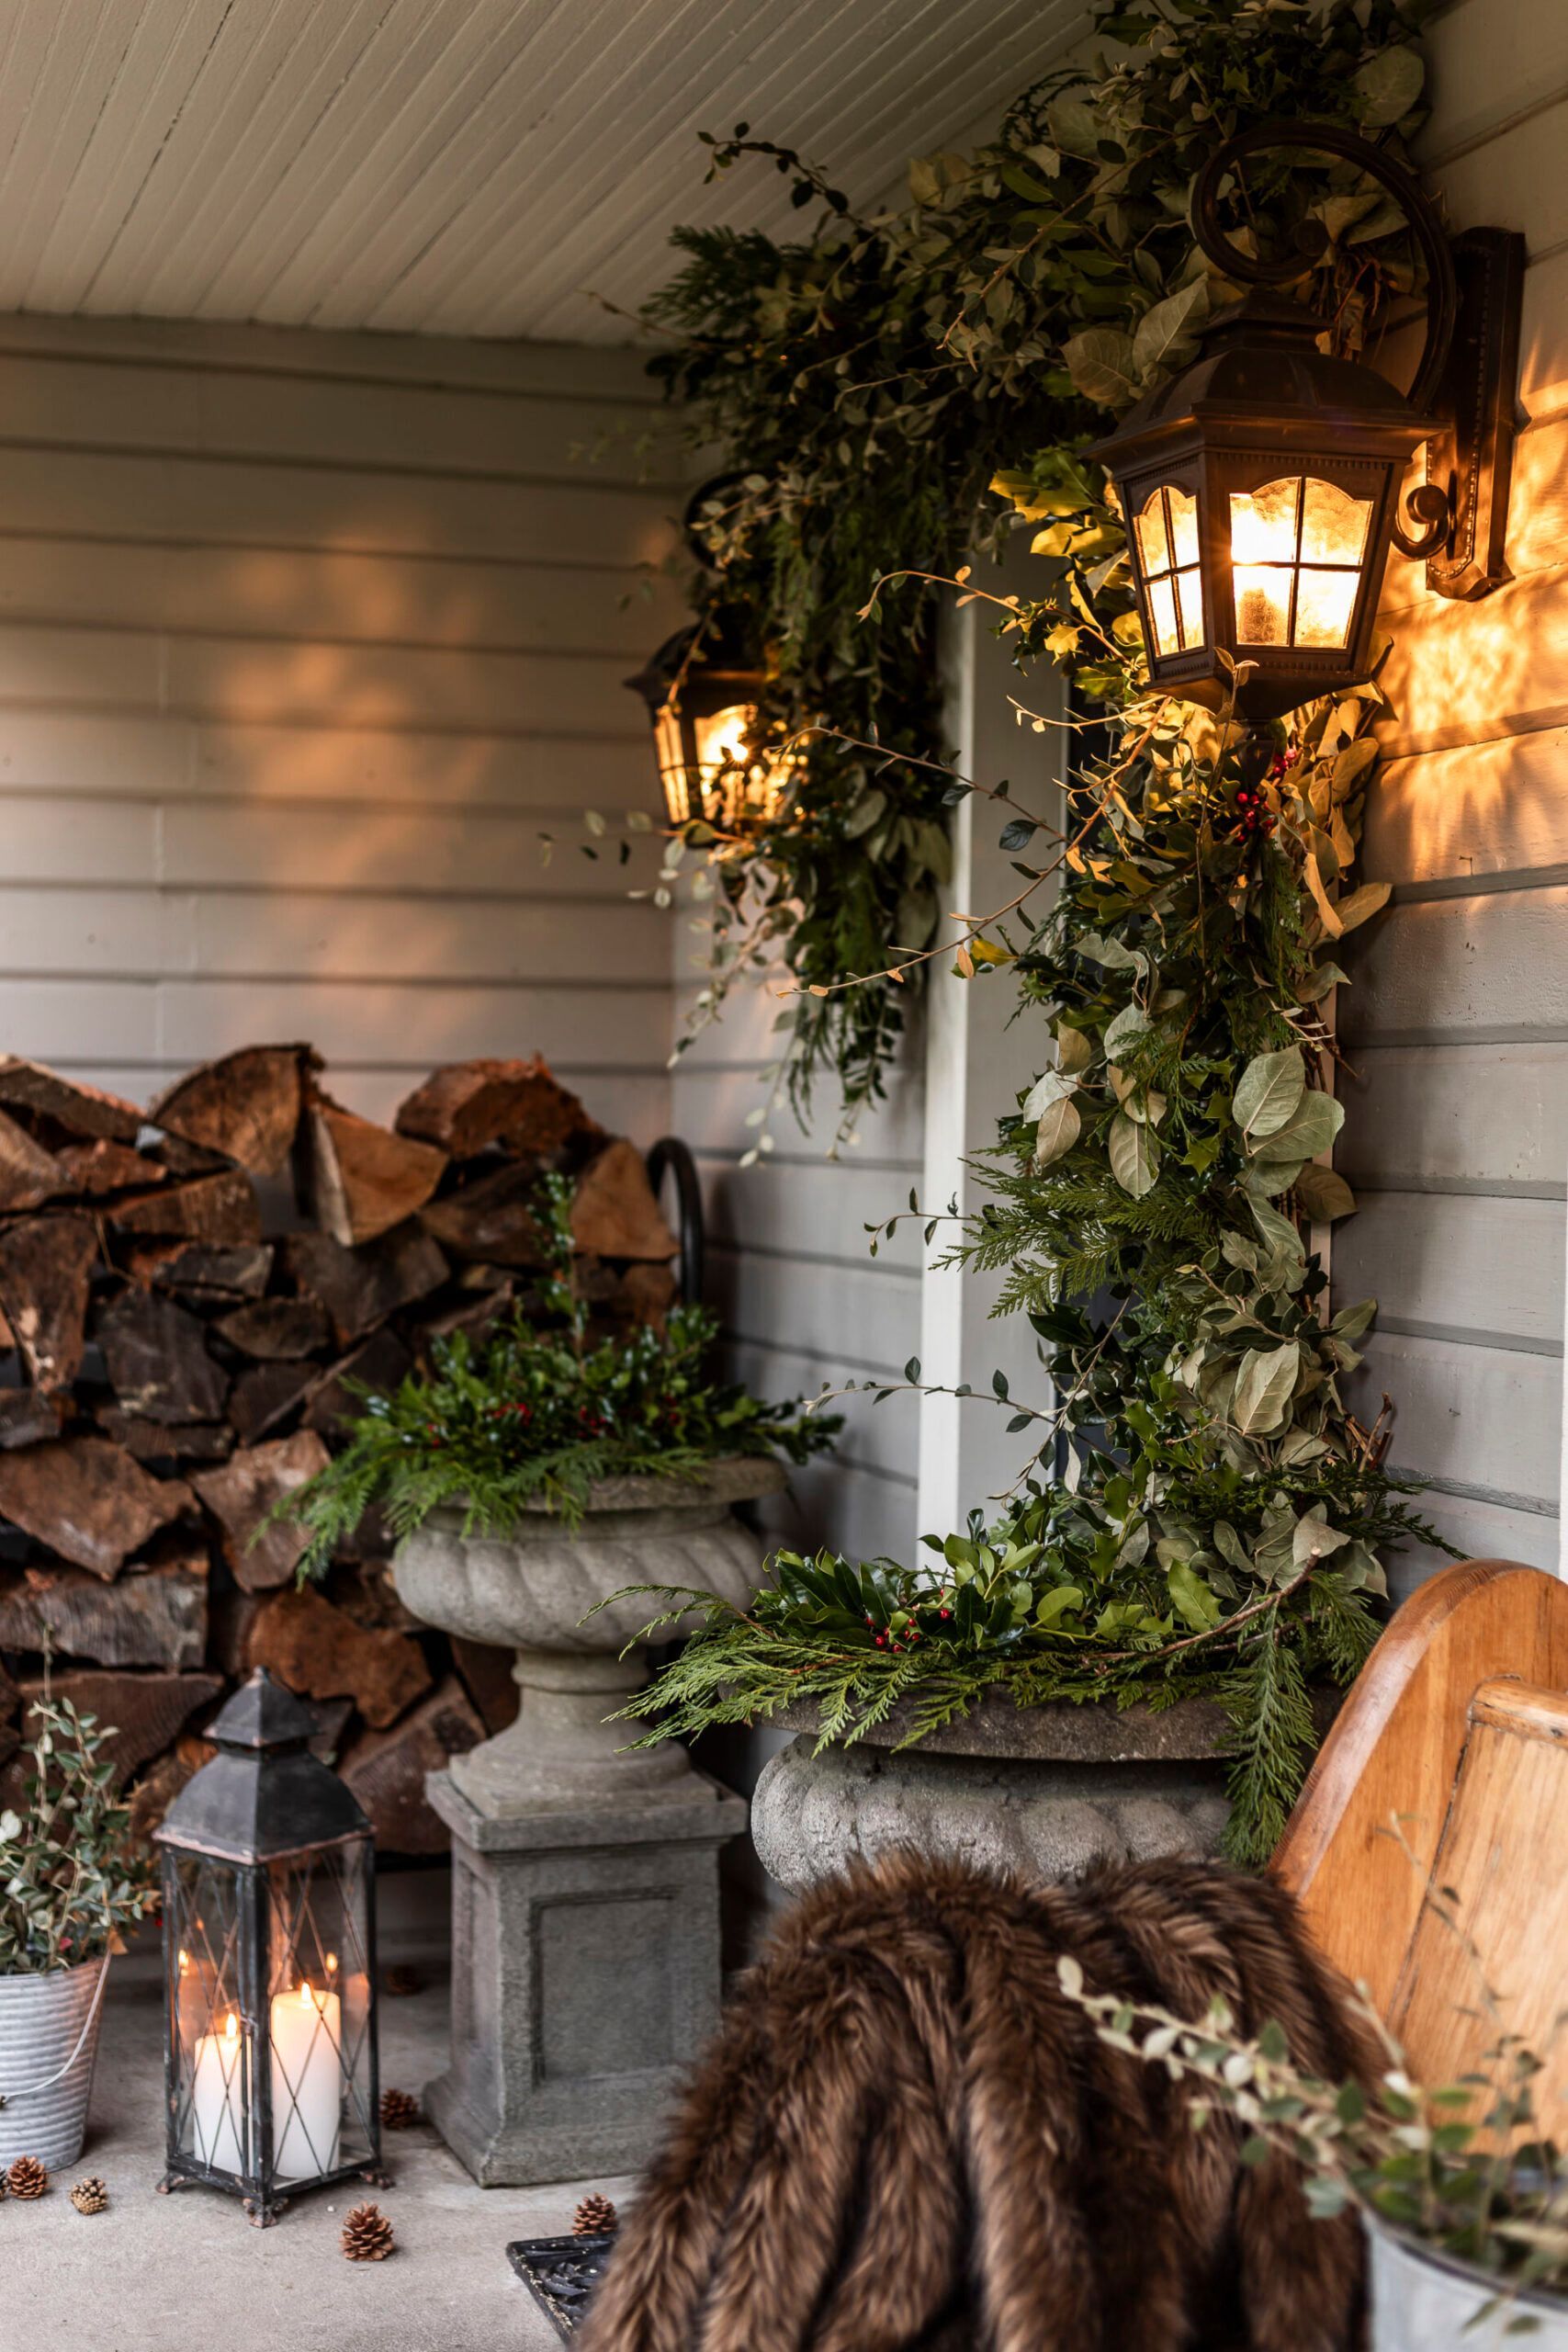 Festive Christmas Front Porch Decor Ideas for a Warm Holiday Welcome